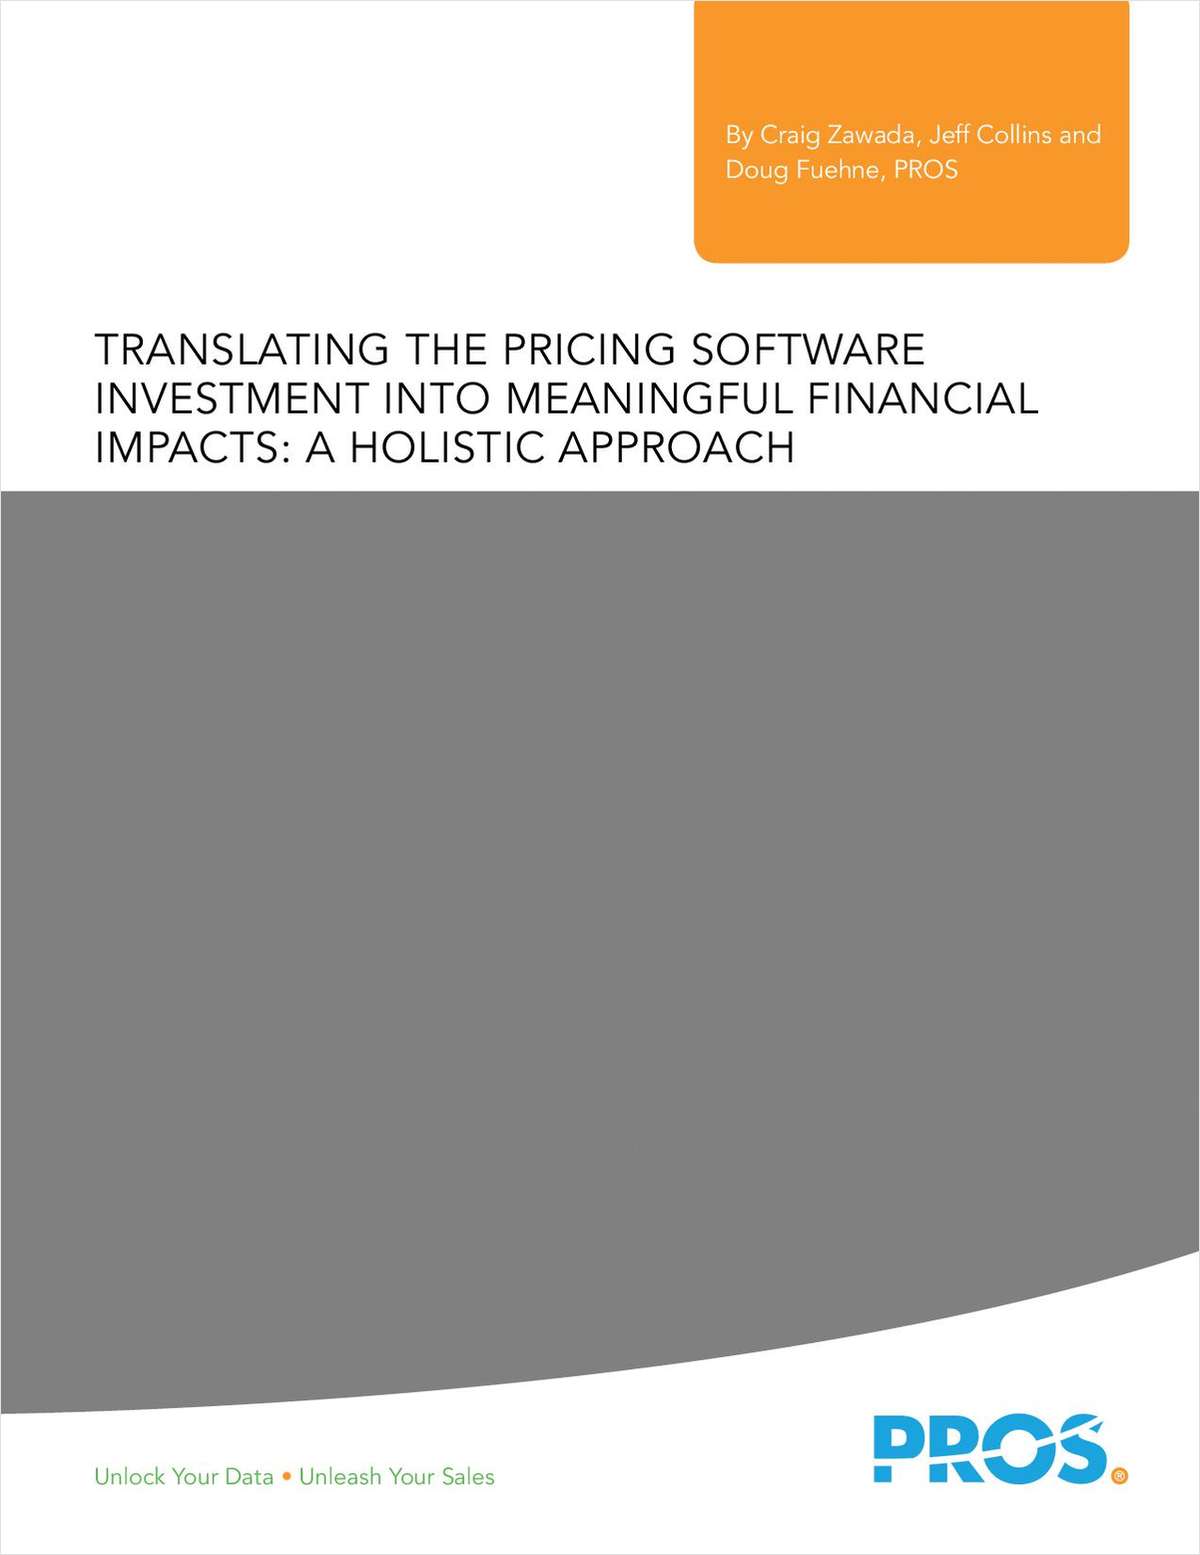 Translating the Pricing Software Investment into Meaning Financial Impacts: A Holistic Approach